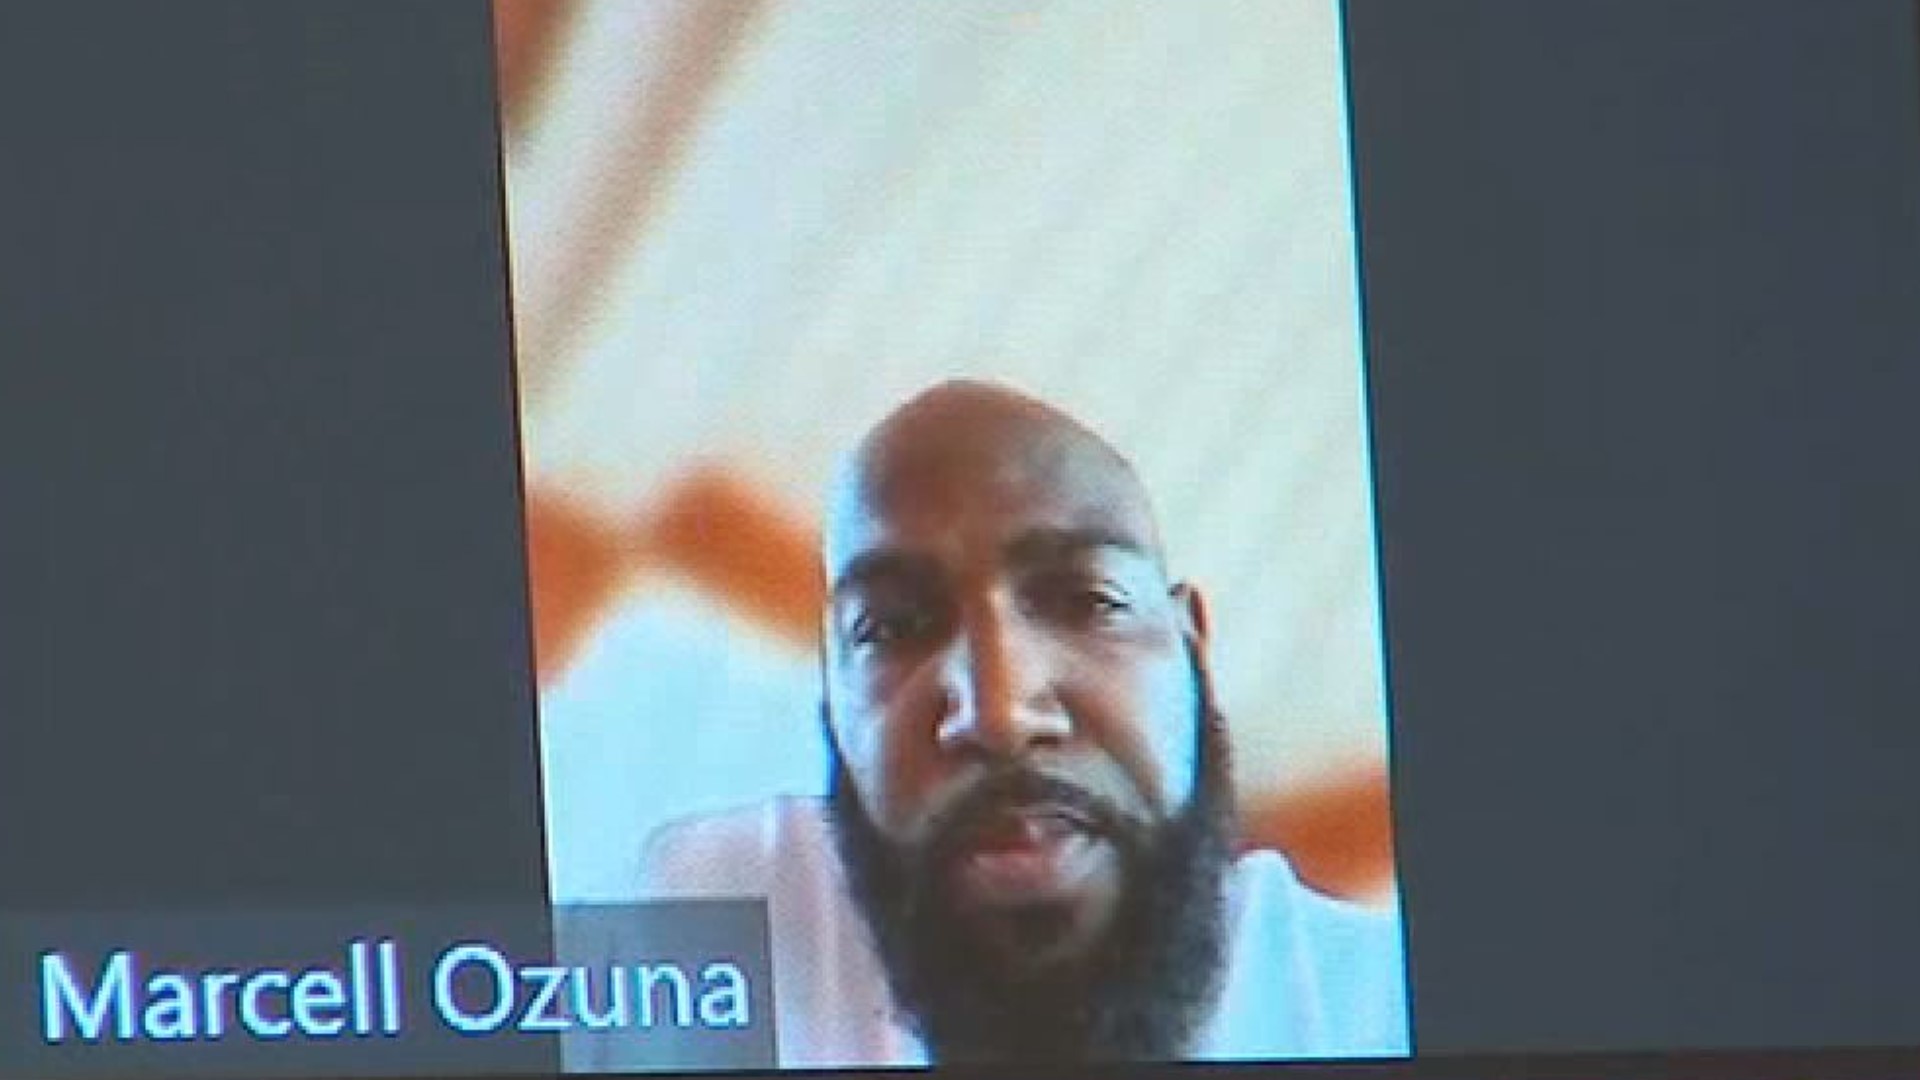 Ozuna's misdemeanor family violence case in Fulton County would be dismissed if he fulfils all the terms of the negotiated resolution.